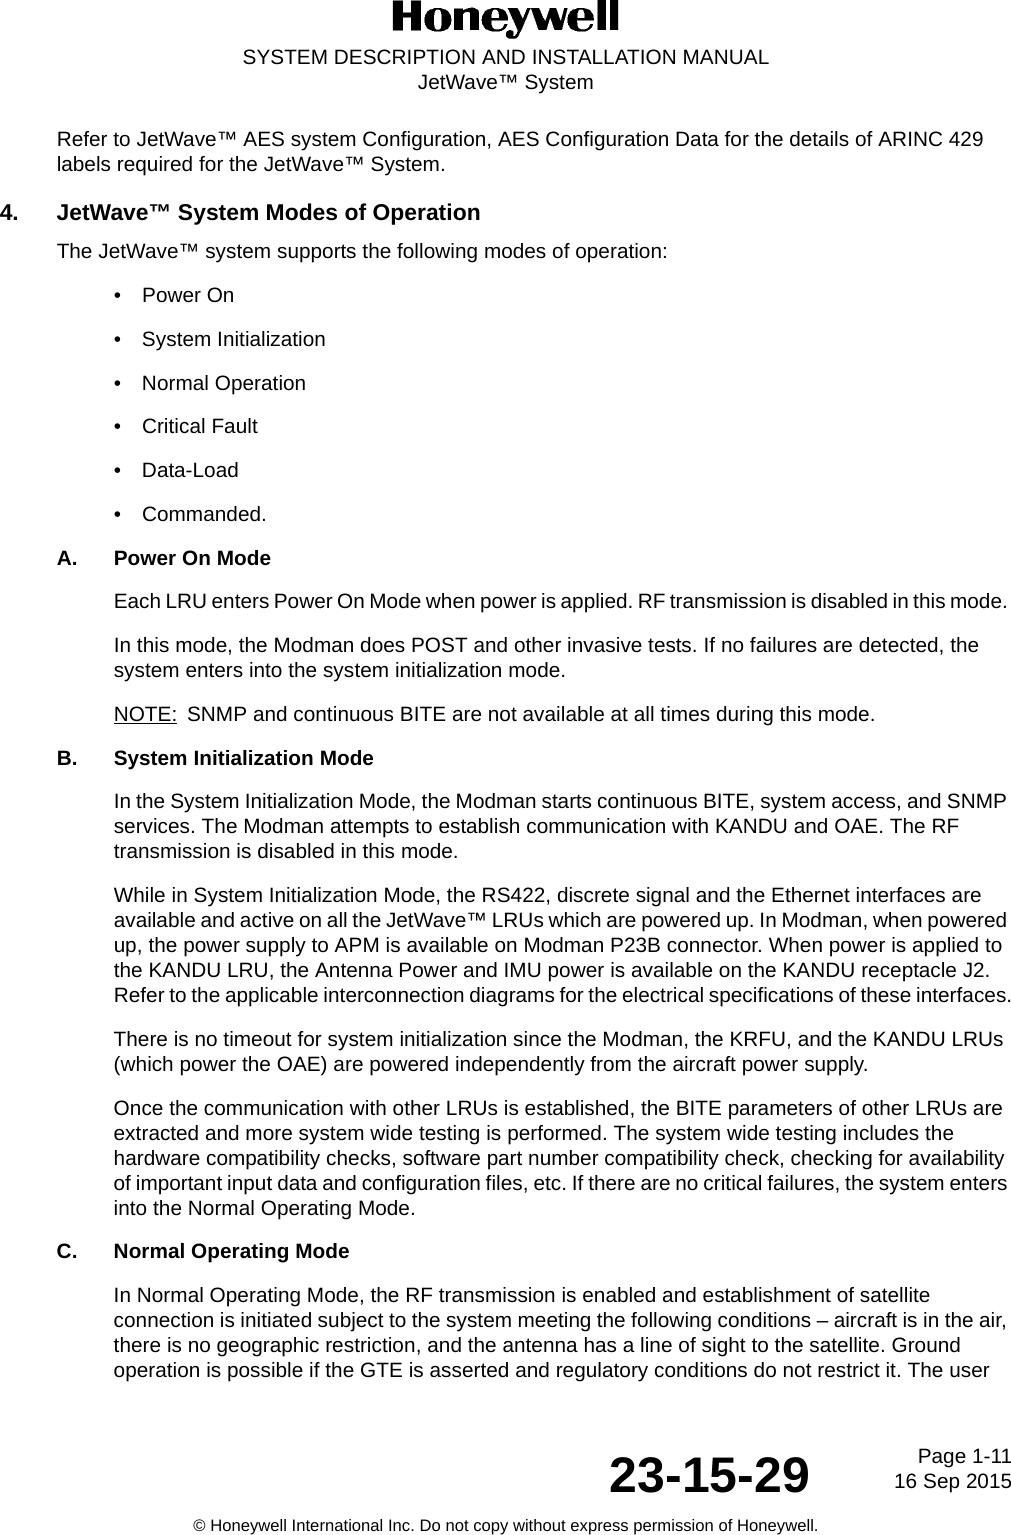 Page 1-1116 Sep 201523-15-29SYSTEM DESCRIPTION AND INSTALLATION MANUALJetWave™ System© Honeywell International Inc. Do not copy without express permission of Honeywell.Refer to JetWave™ AES system Configuration, AES Configuration Data for the details of ARINC 429 labels required for the JetWave™ System.4. JetWave™ System Modes of OperationThe JetWave™ system supports the following modes of operation:• Power On• System Initialization• Normal Operation• Critical Fault• Data-Load• Commanded. A. Power On ModeEach LRU enters Power On Mode when power is applied. RF transmission is disabled in this mode. In this mode, the Modman does POST and other invasive tests. If no failures are detected, the system enters into the system initialization mode.NOTE: SNMP and continuous BITE are not available at all times during this mode.B. System Initialization ModeIn the System Initialization Mode, the Modman starts continuous BITE, system access, and SNMP services. The Modman attempts to establish communication with KANDU and OAE. The RF transmission is disabled in this mode. While in System Initialization Mode, the RS422, discrete signal and the Ethernet interfaces are available and active on all the JetWave™ LRUs which are powered up. In Modman, when powered up, the power supply to APM is available on Modman P23B connector. When power is applied to the KANDU LRU, the Antenna Power and IMU power is available on the KANDU receptacle J2. Refer to the applicable interconnection diagrams for the electrical specifications of these interfaces.There is no timeout for system initialization since the Modman, the KRFU, and the KANDU LRUs (which power the OAE) are powered independently from the aircraft power supply.Once the communication with other LRUs is established, the BITE parameters of other LRUs are extracted and more system wide testing is performed. The system wide testing includes the hardware compatibility checks, software part number compatibility check, checking for availability of important input data and configuration files, etc. If there are no critical failures, the system enters into the Normal Operating Mode.C. Normal Operating ModeIn Normal Operating Mode, the RF transmission is enabled and establishment of satellite connection is initiated subject to the system meeting the following conditions – aircraft is in the air, there is no geographic restriction, and the antenna has a line of sight to the satellite. Ground operation is possible if the GTE is asserted and regulatory conditions do not restrict it. The user 